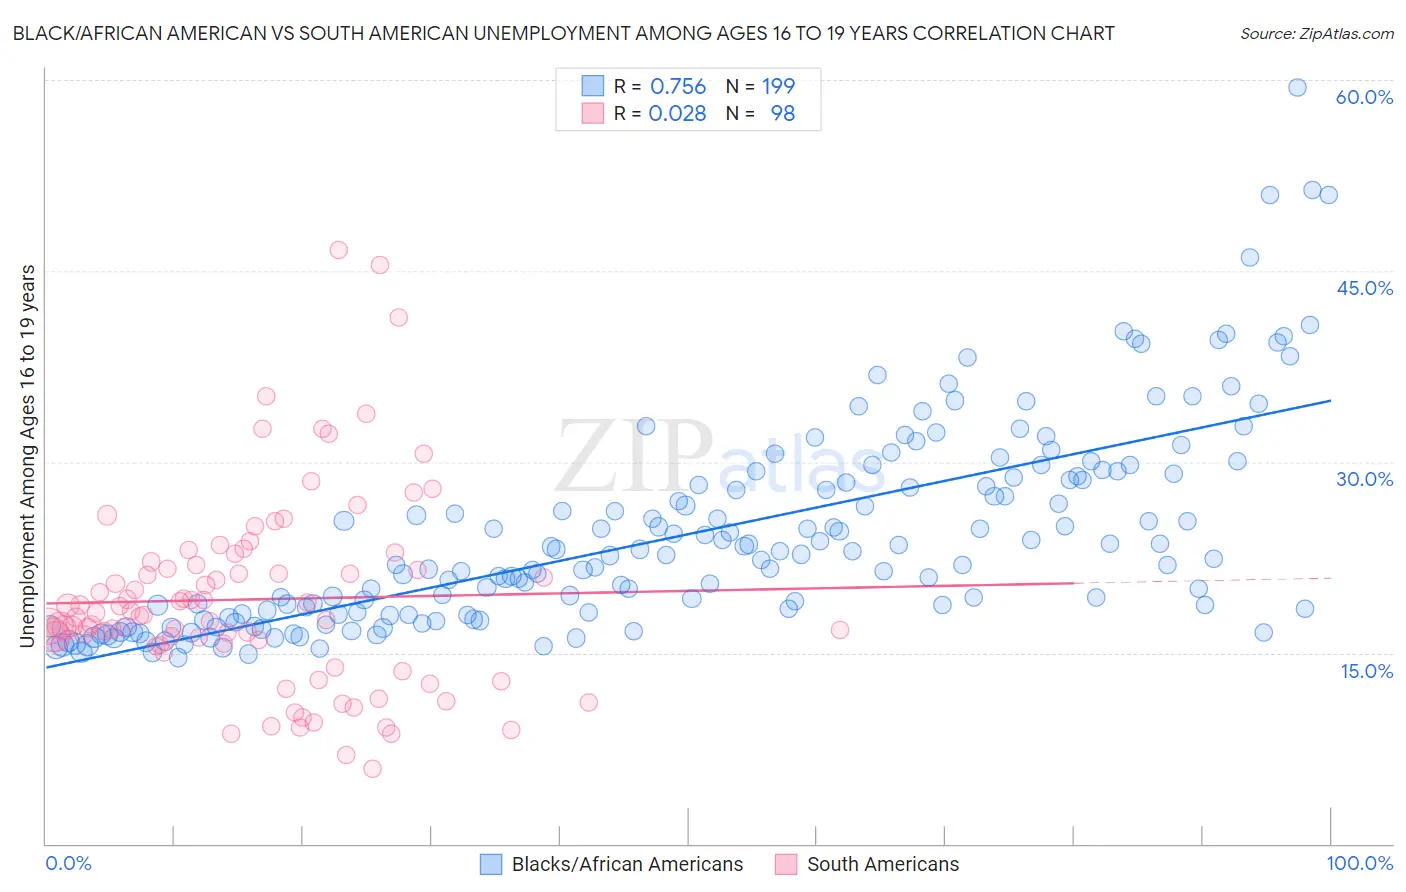 Black/African American vs South American Unemployment Among Ages 16 to 19 years